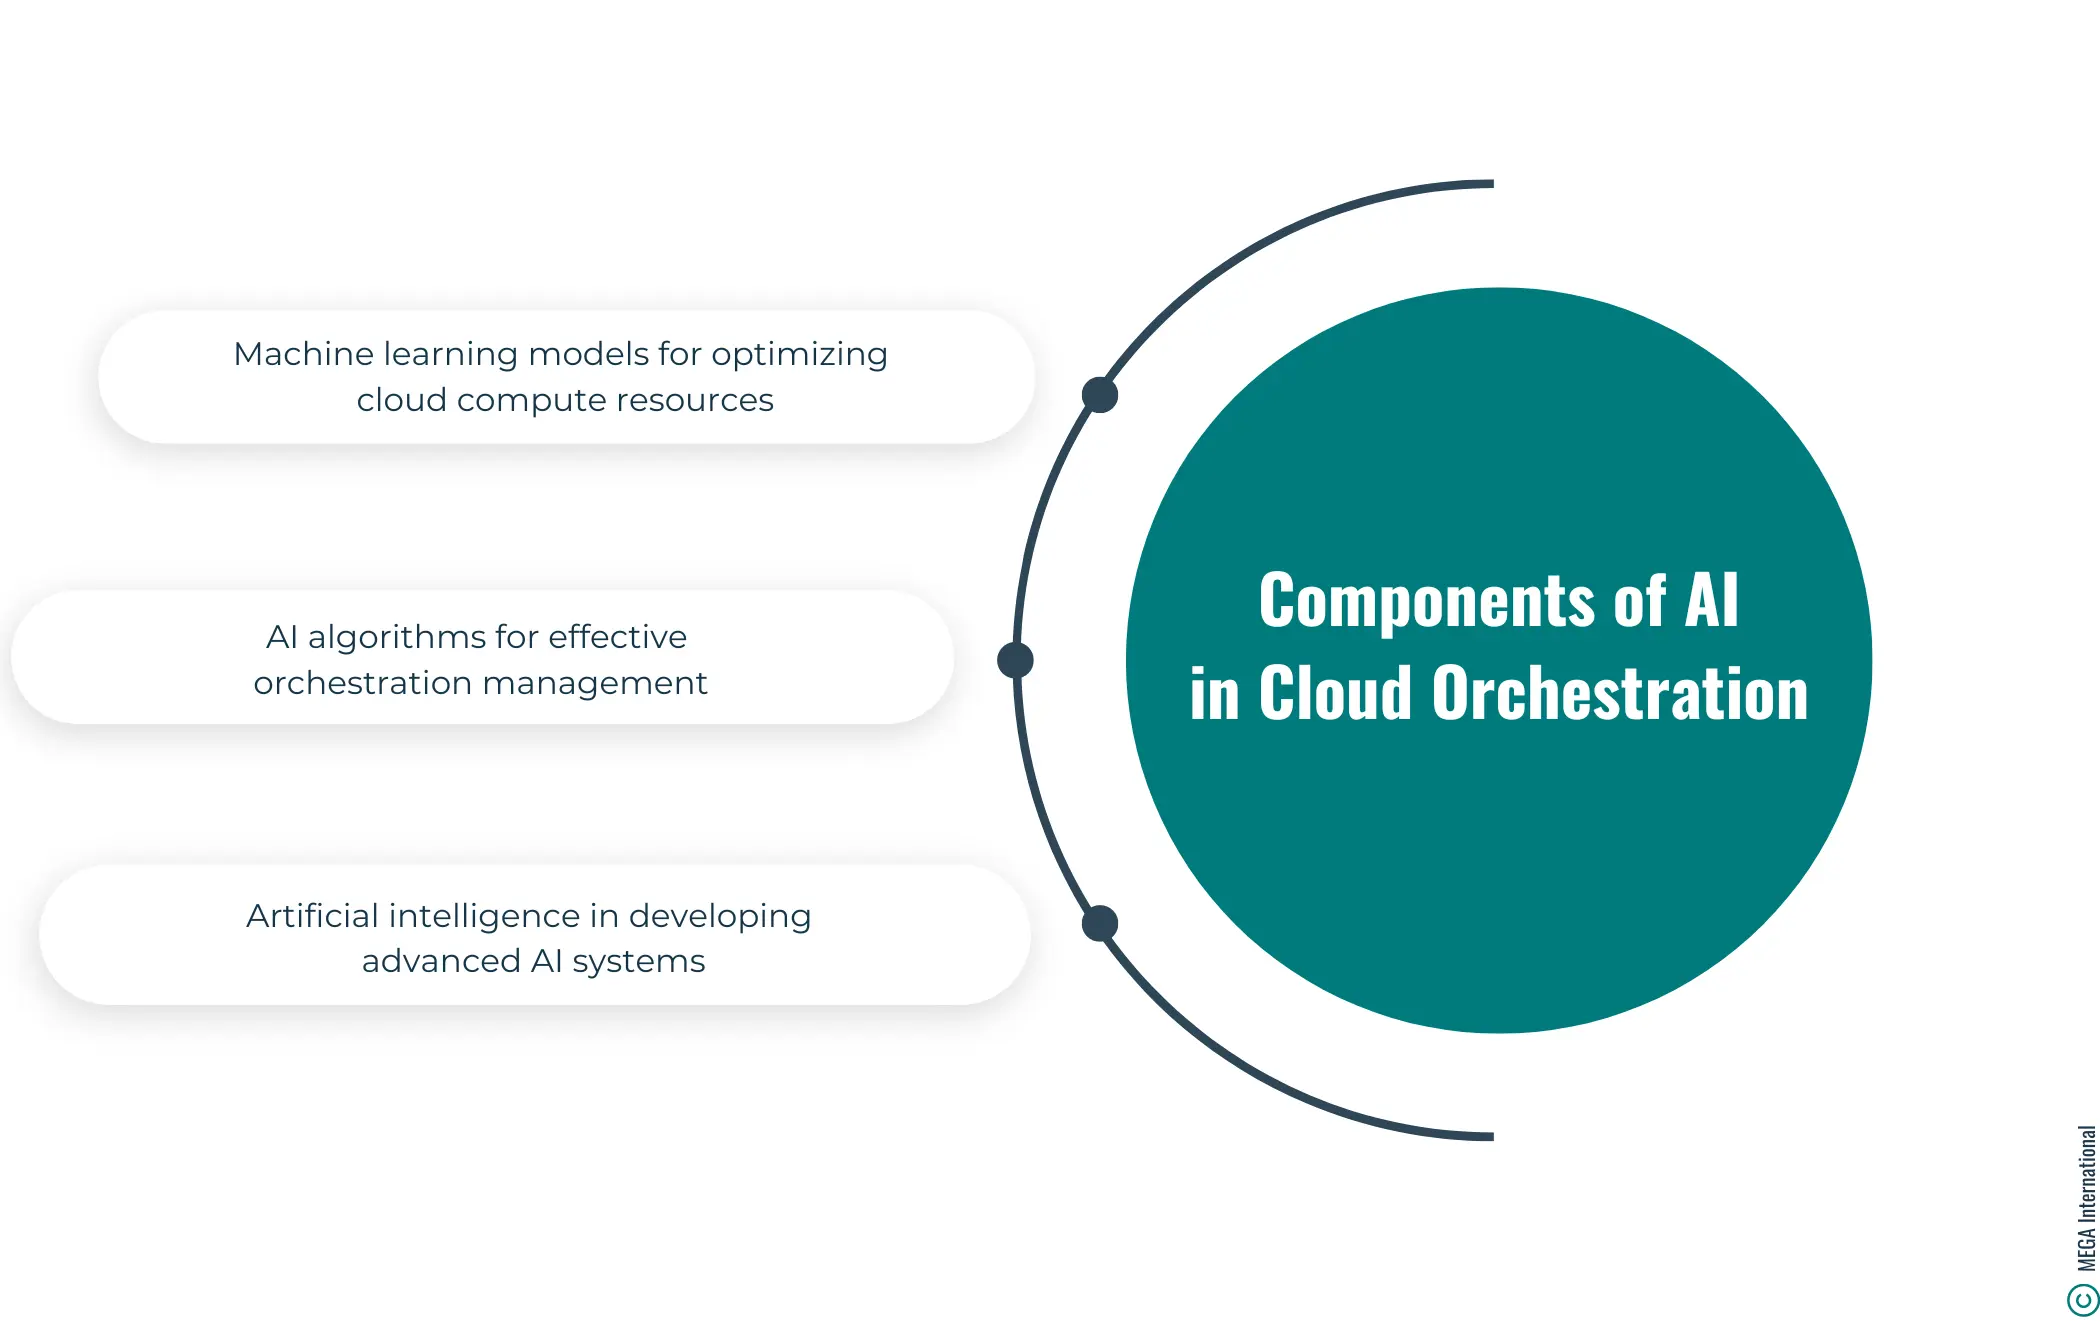 key components of AI in cloud orchestration